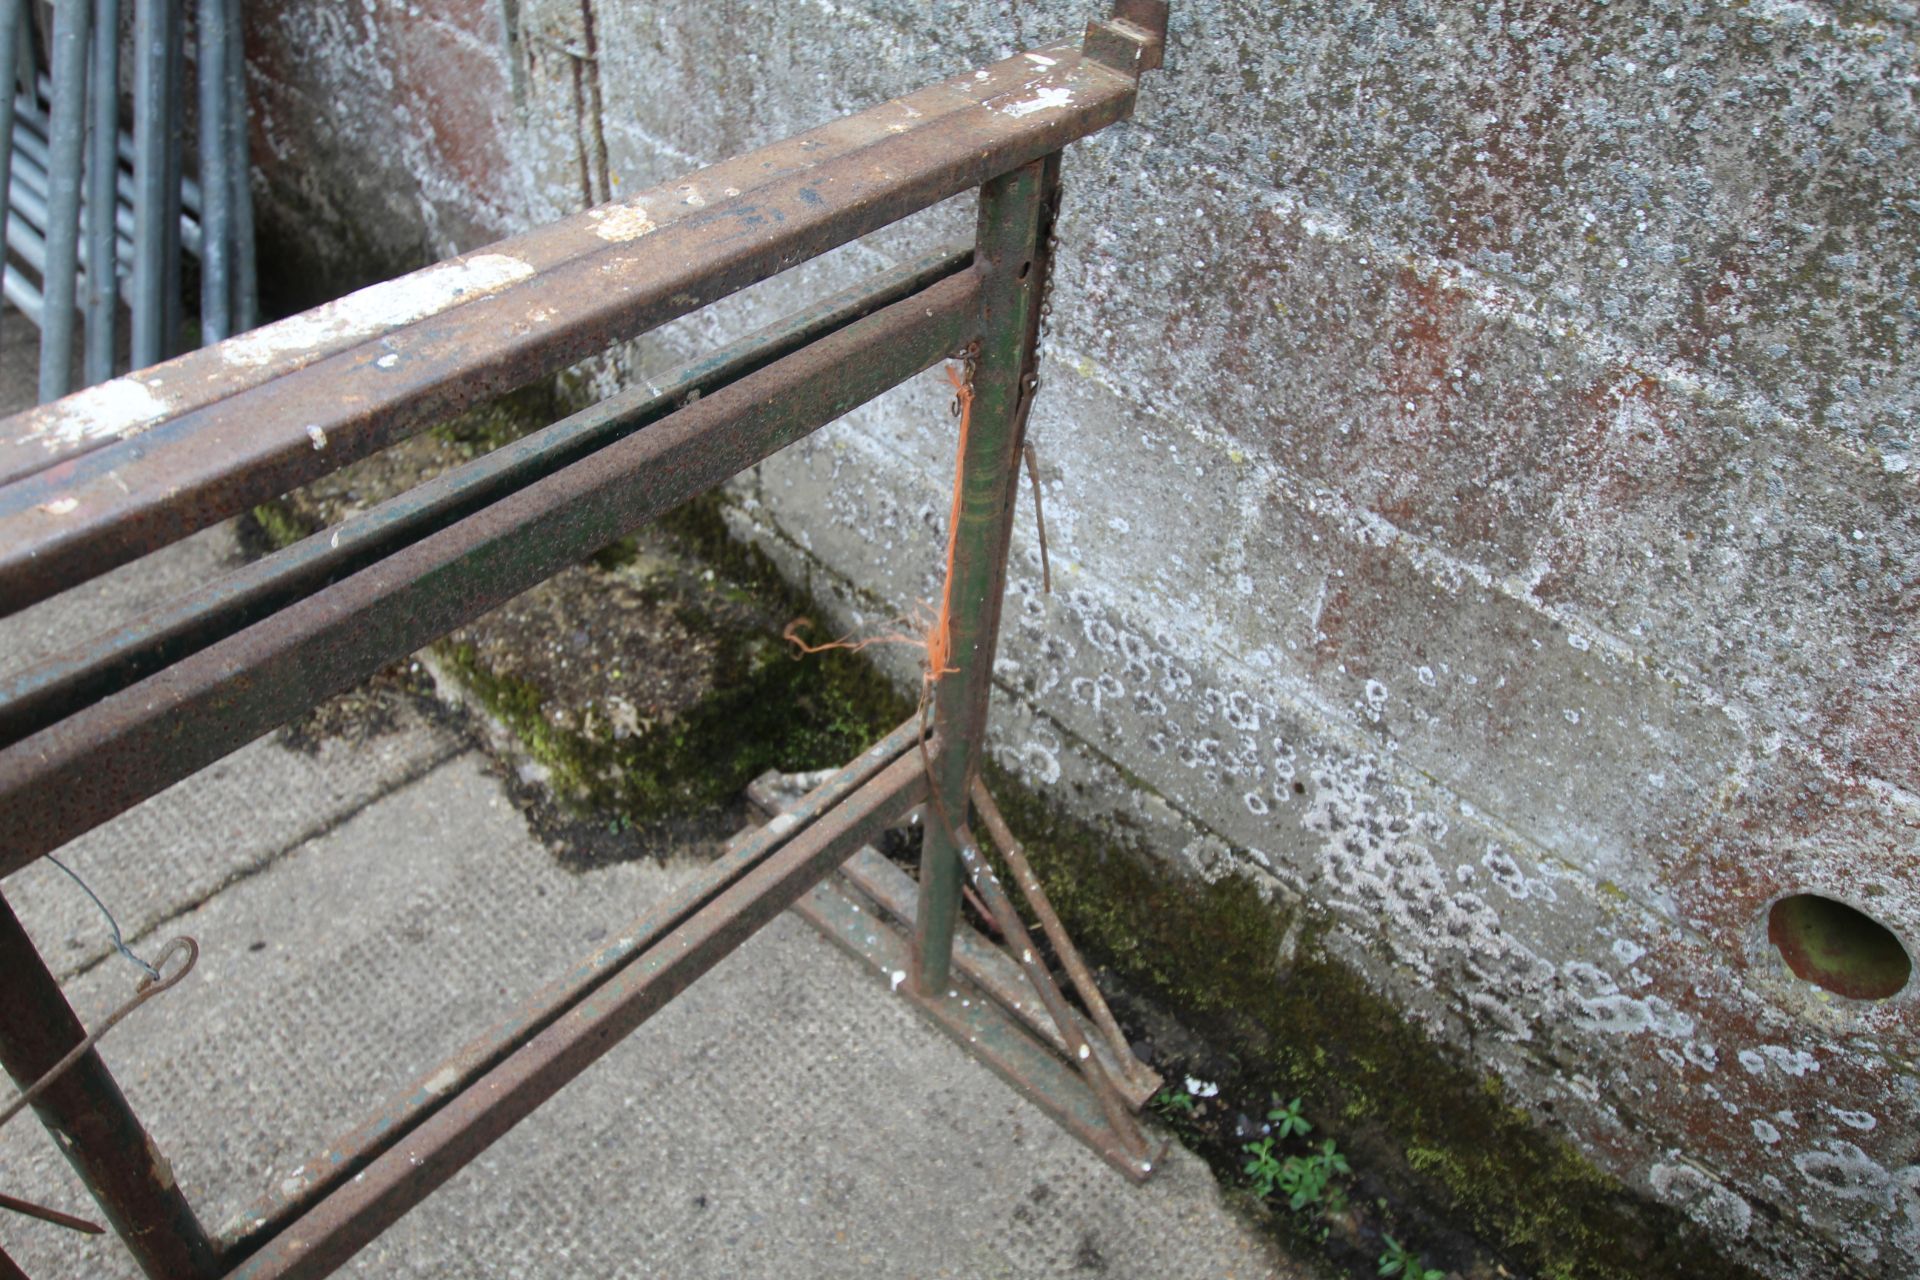 Two builders trestles. - Image 4 of 4